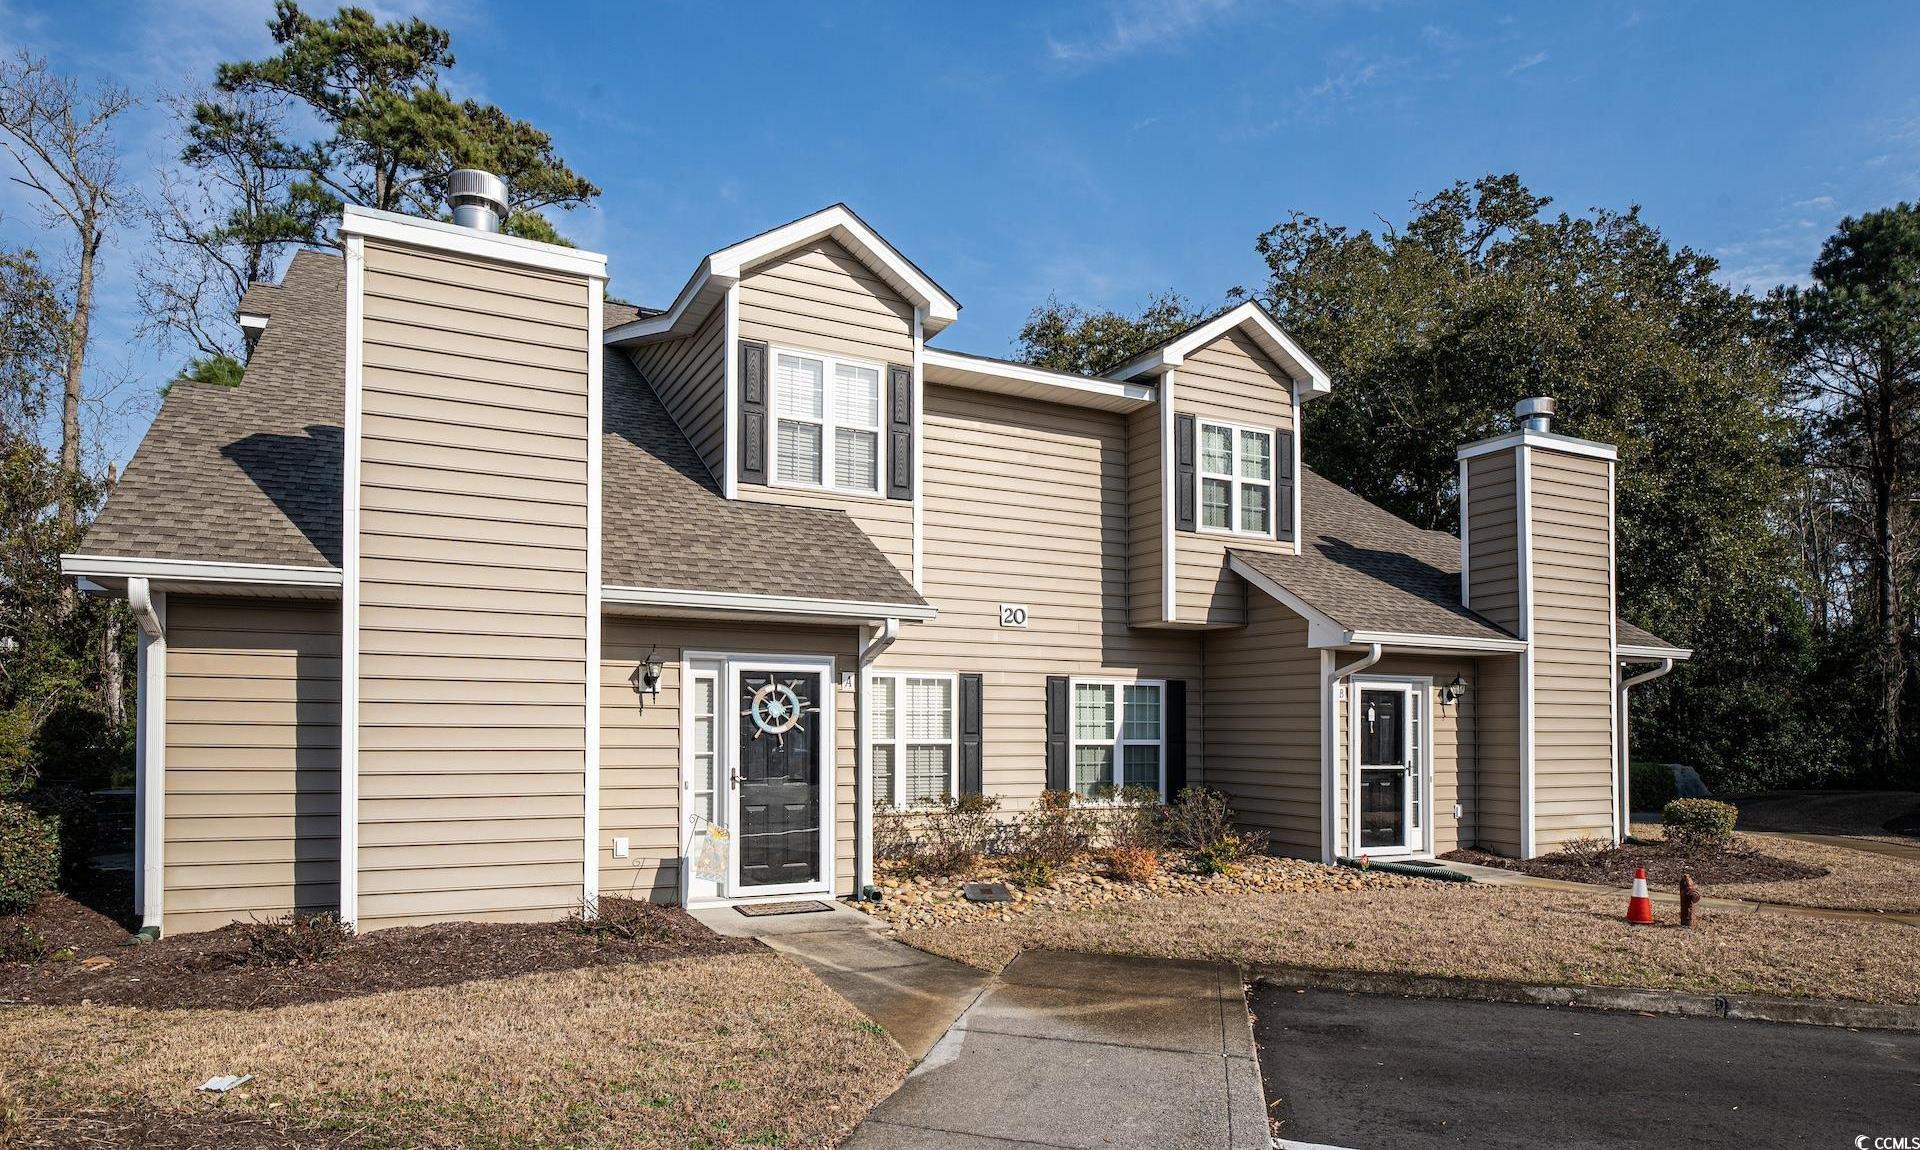 Photo one of 503 20Th Ave. N # 20A North Myrtle Beach SC 29582 | MLS 2405197